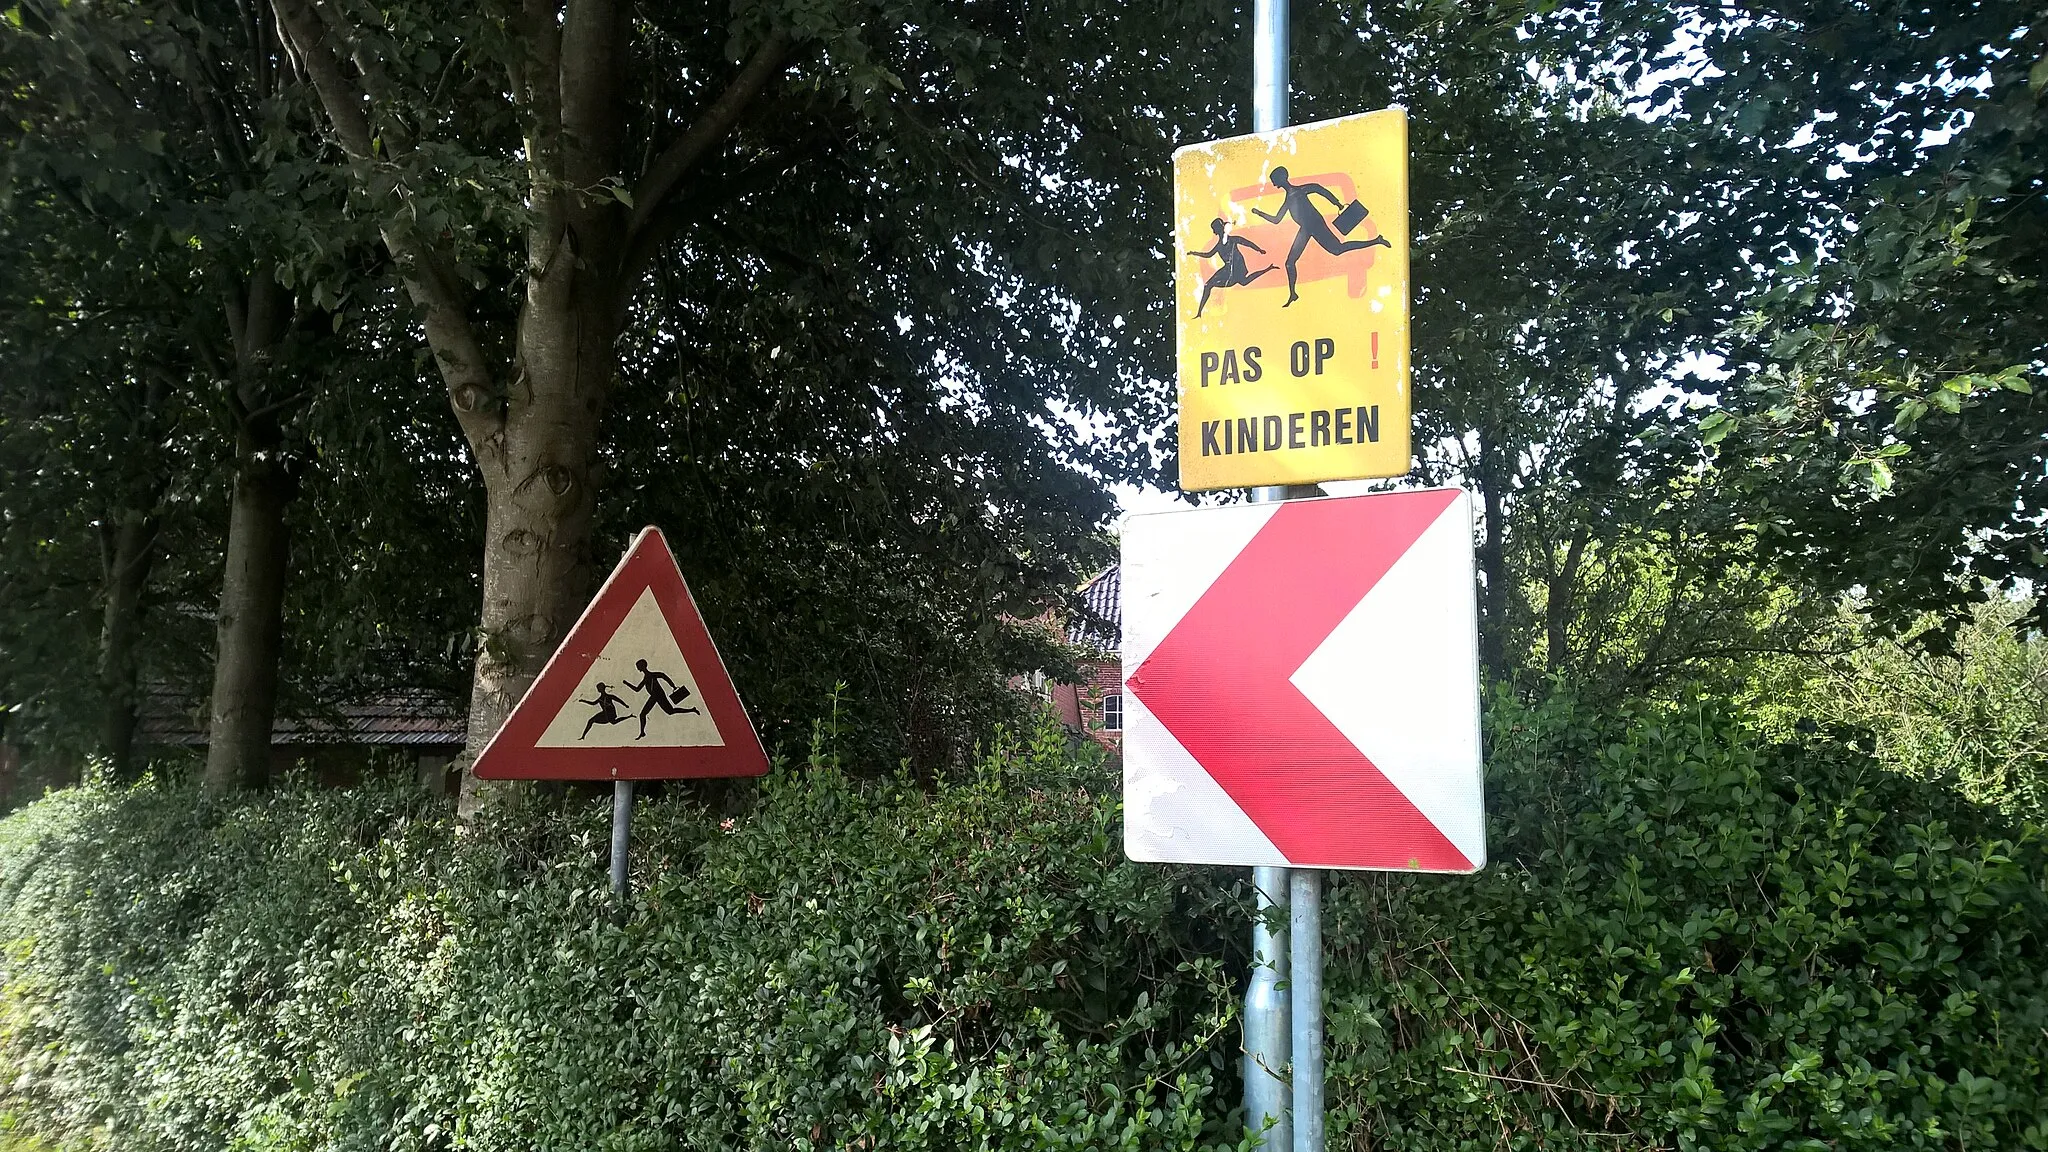 Photo showing: Various traffic signs telling drivers to slow down in Tripscompagnie, Menterwolde, Groningen province.